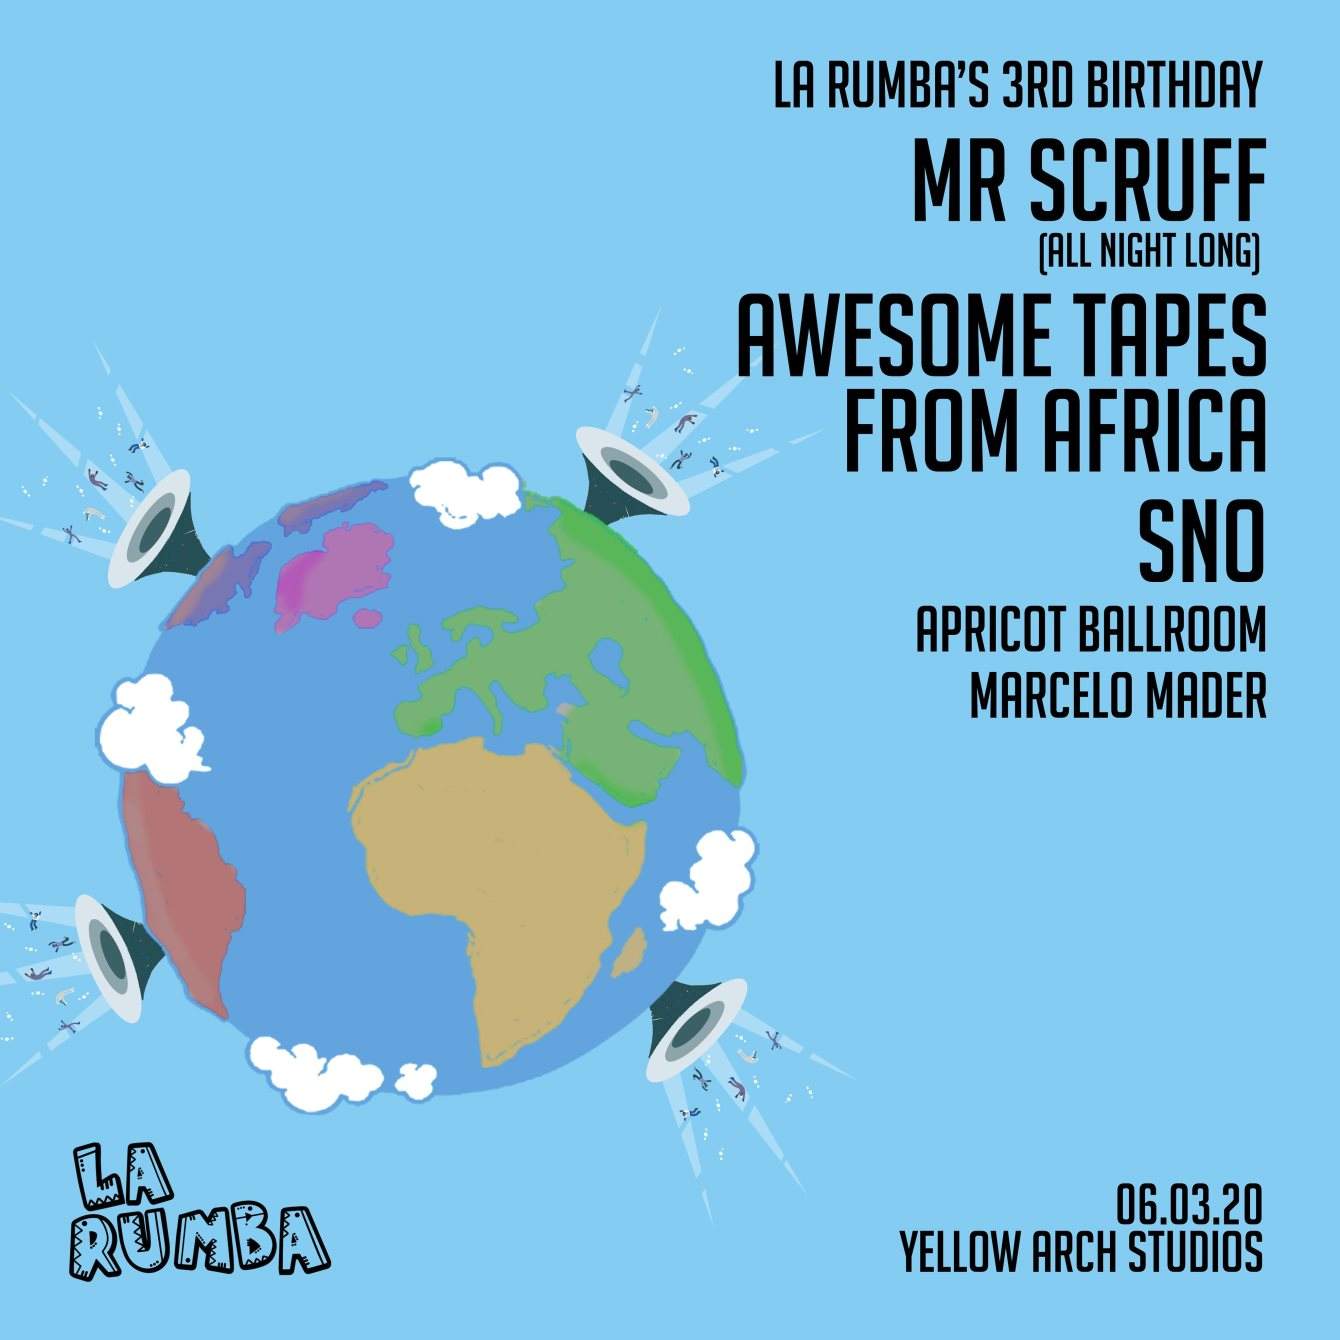 La Rumba's 3rd Birthday: Mr. Scruff, Awesome Tapes From Africa, SNO - Página trasera